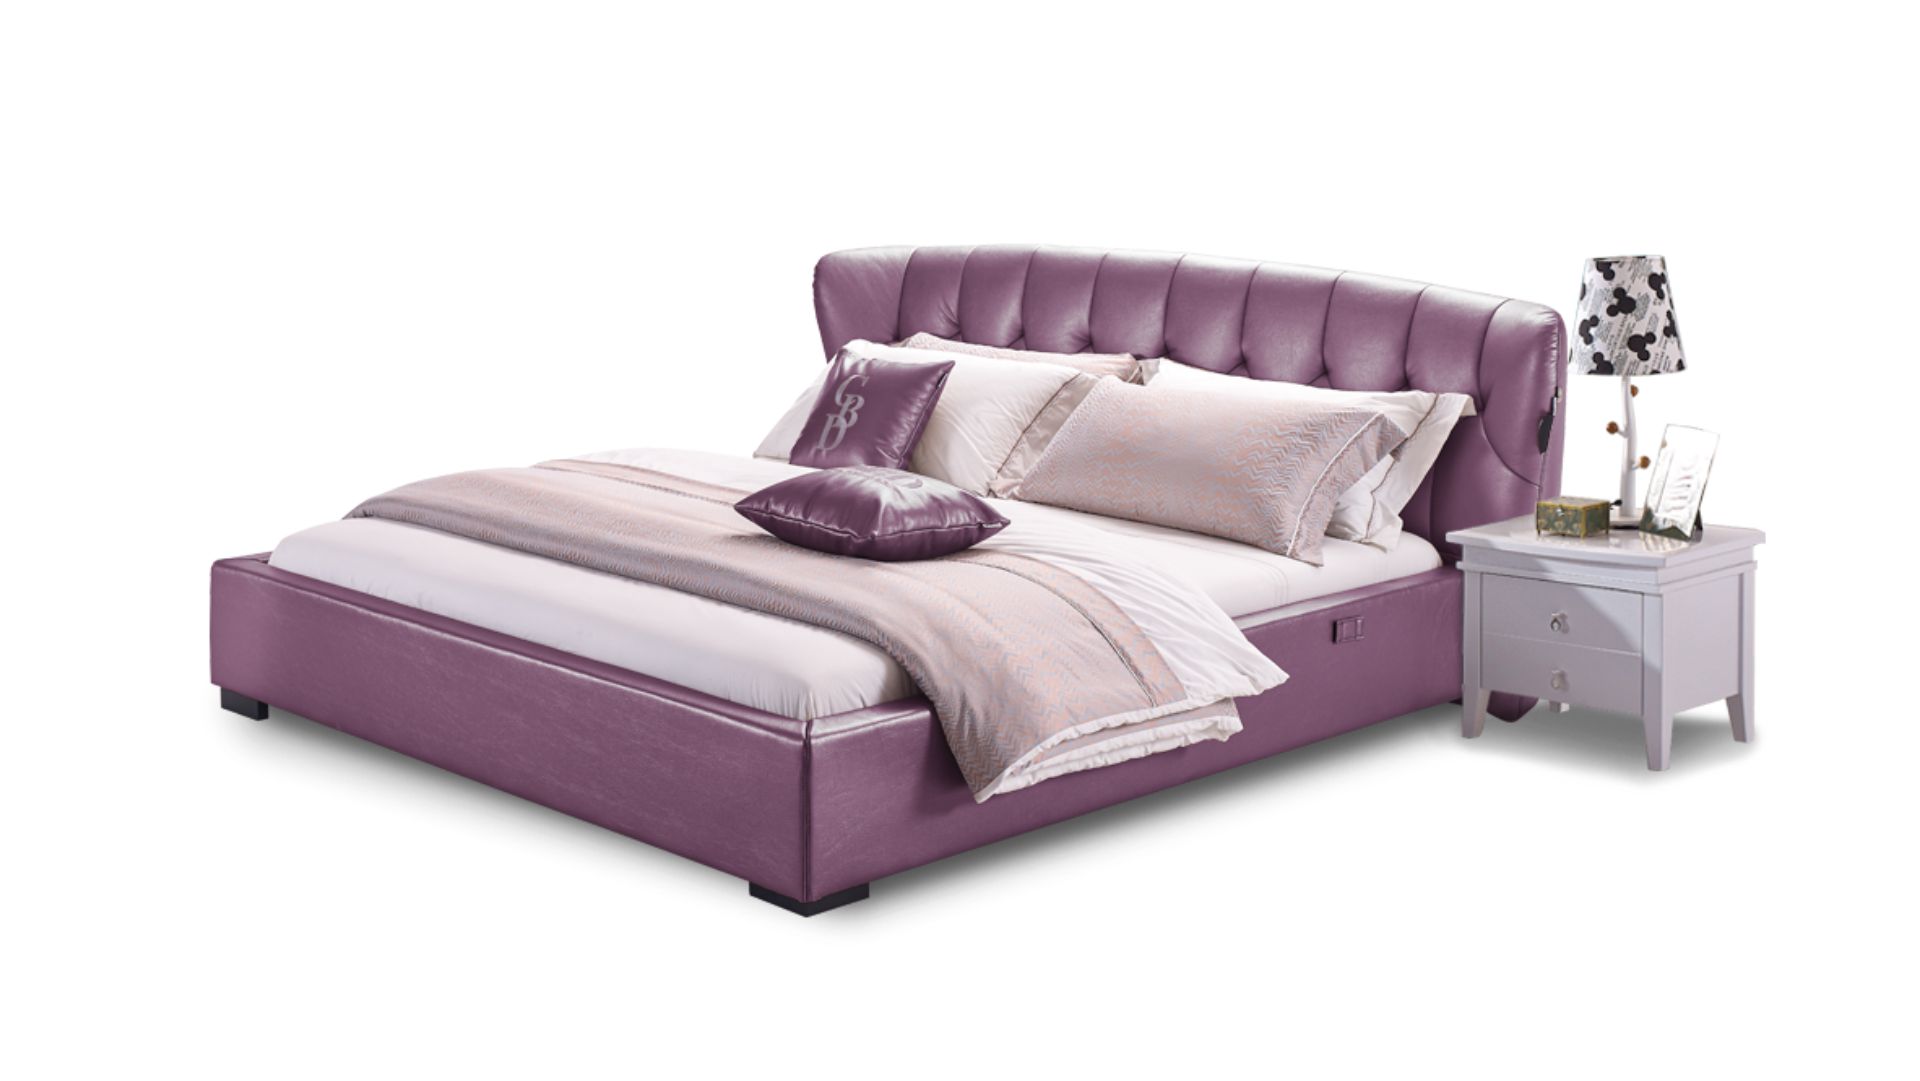 <p><strong>description：</strong></p><p>*bedframe with the 3D slats or motion</p><p>*leather feeling fabric, easy to clean</p><p>*Typical European style. &nbsp;</p><p>*Well matched the mattress and bedding.</p><p><br/></p>